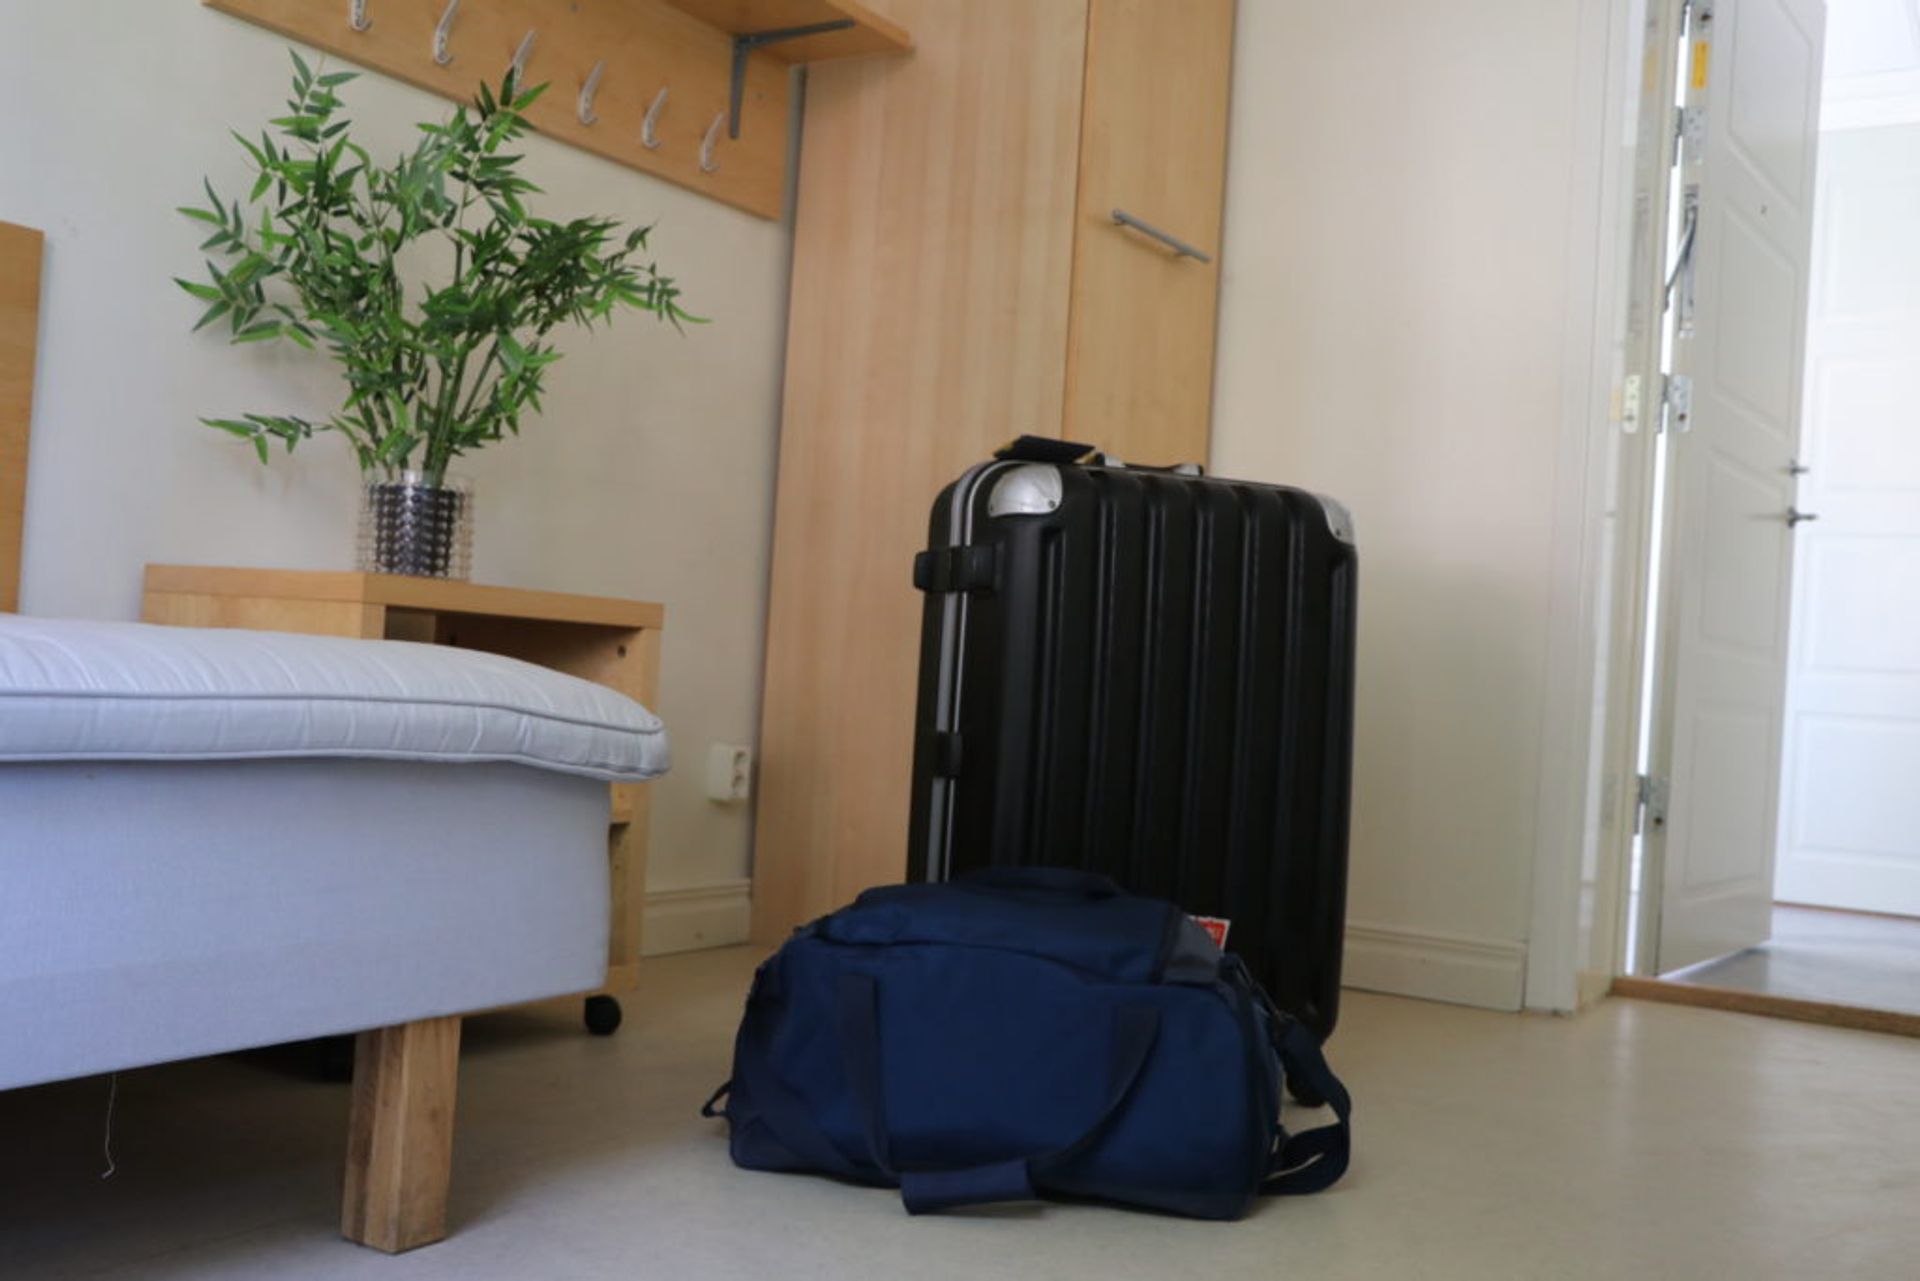 Photos of suitcases showing that travelling light can make things easier on arrival day